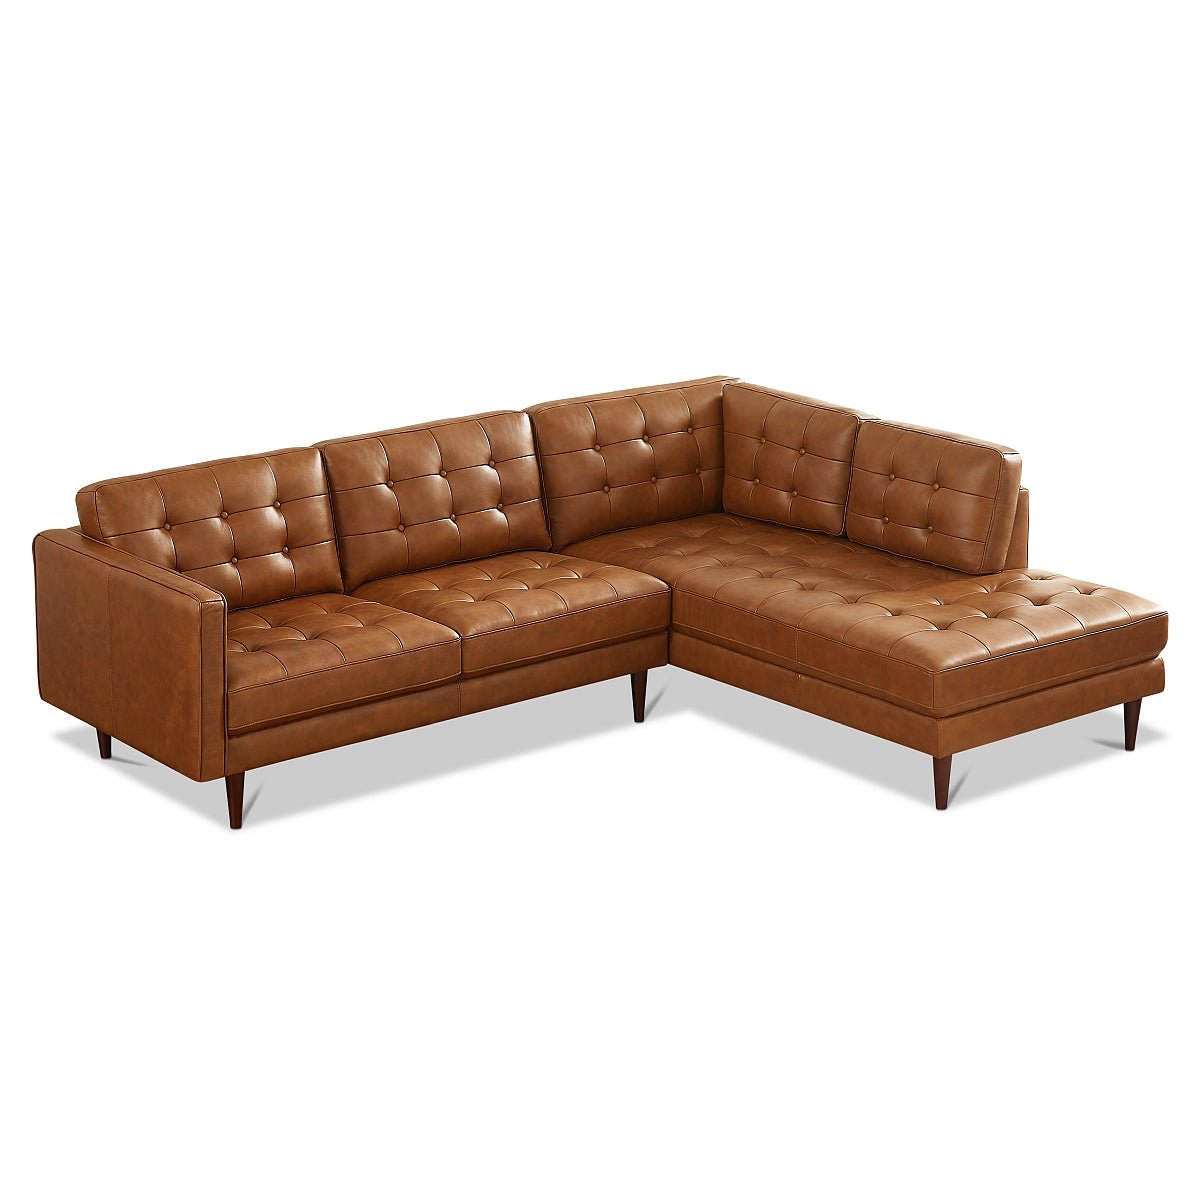 Lugano L-Shaped Genuine Leather Right-Facing Sectional Sofa Cognac